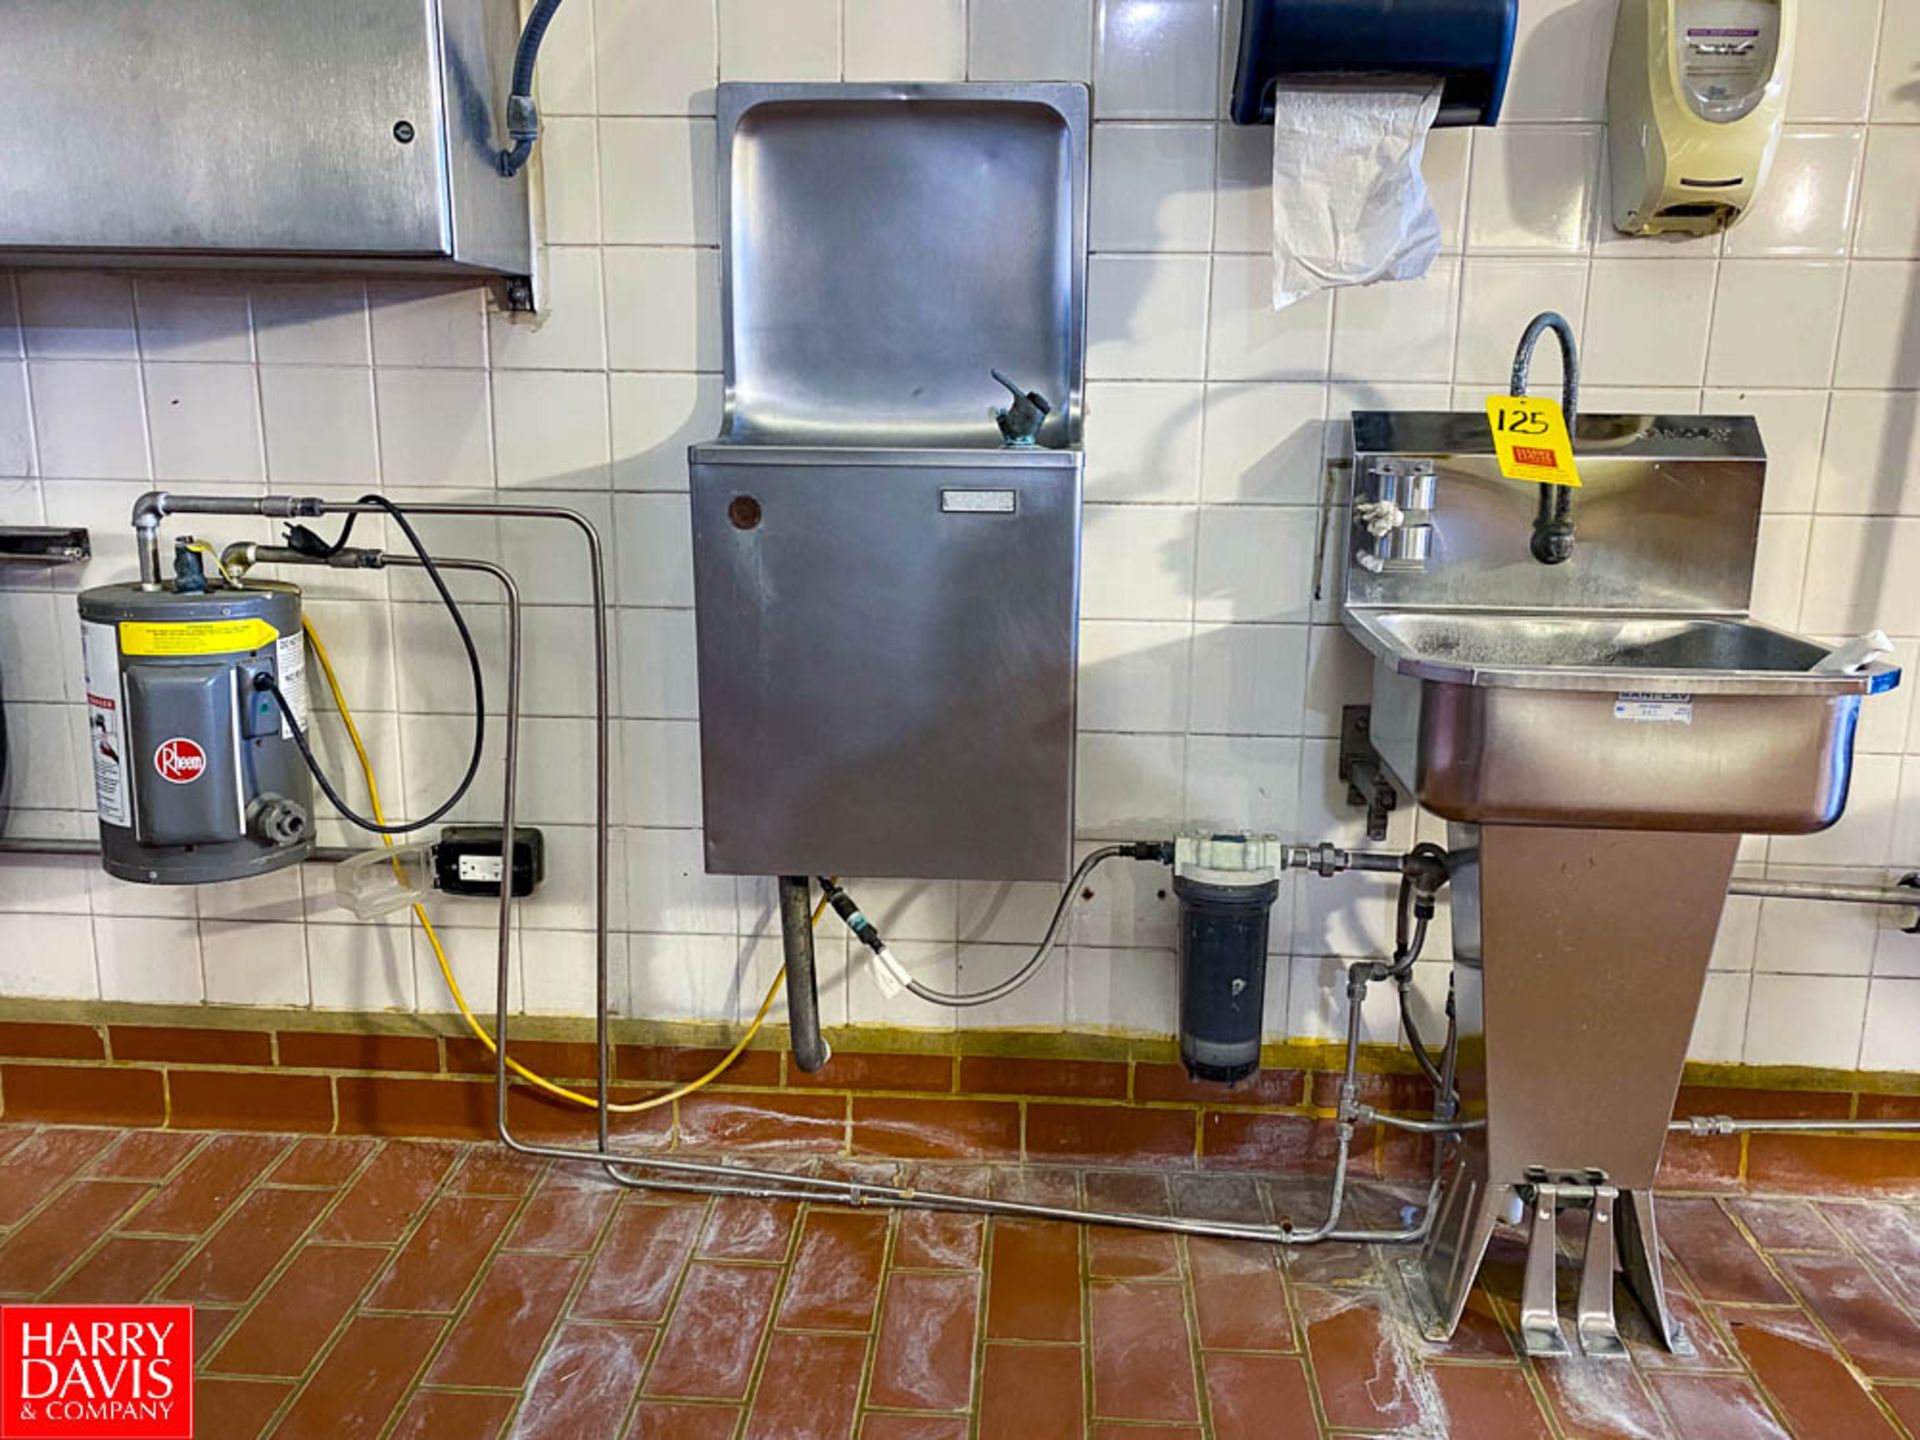 S/S Hand Sink with Foot Control, Rheem Water Heater and Drinking Fountain - Rigging Fee: $200